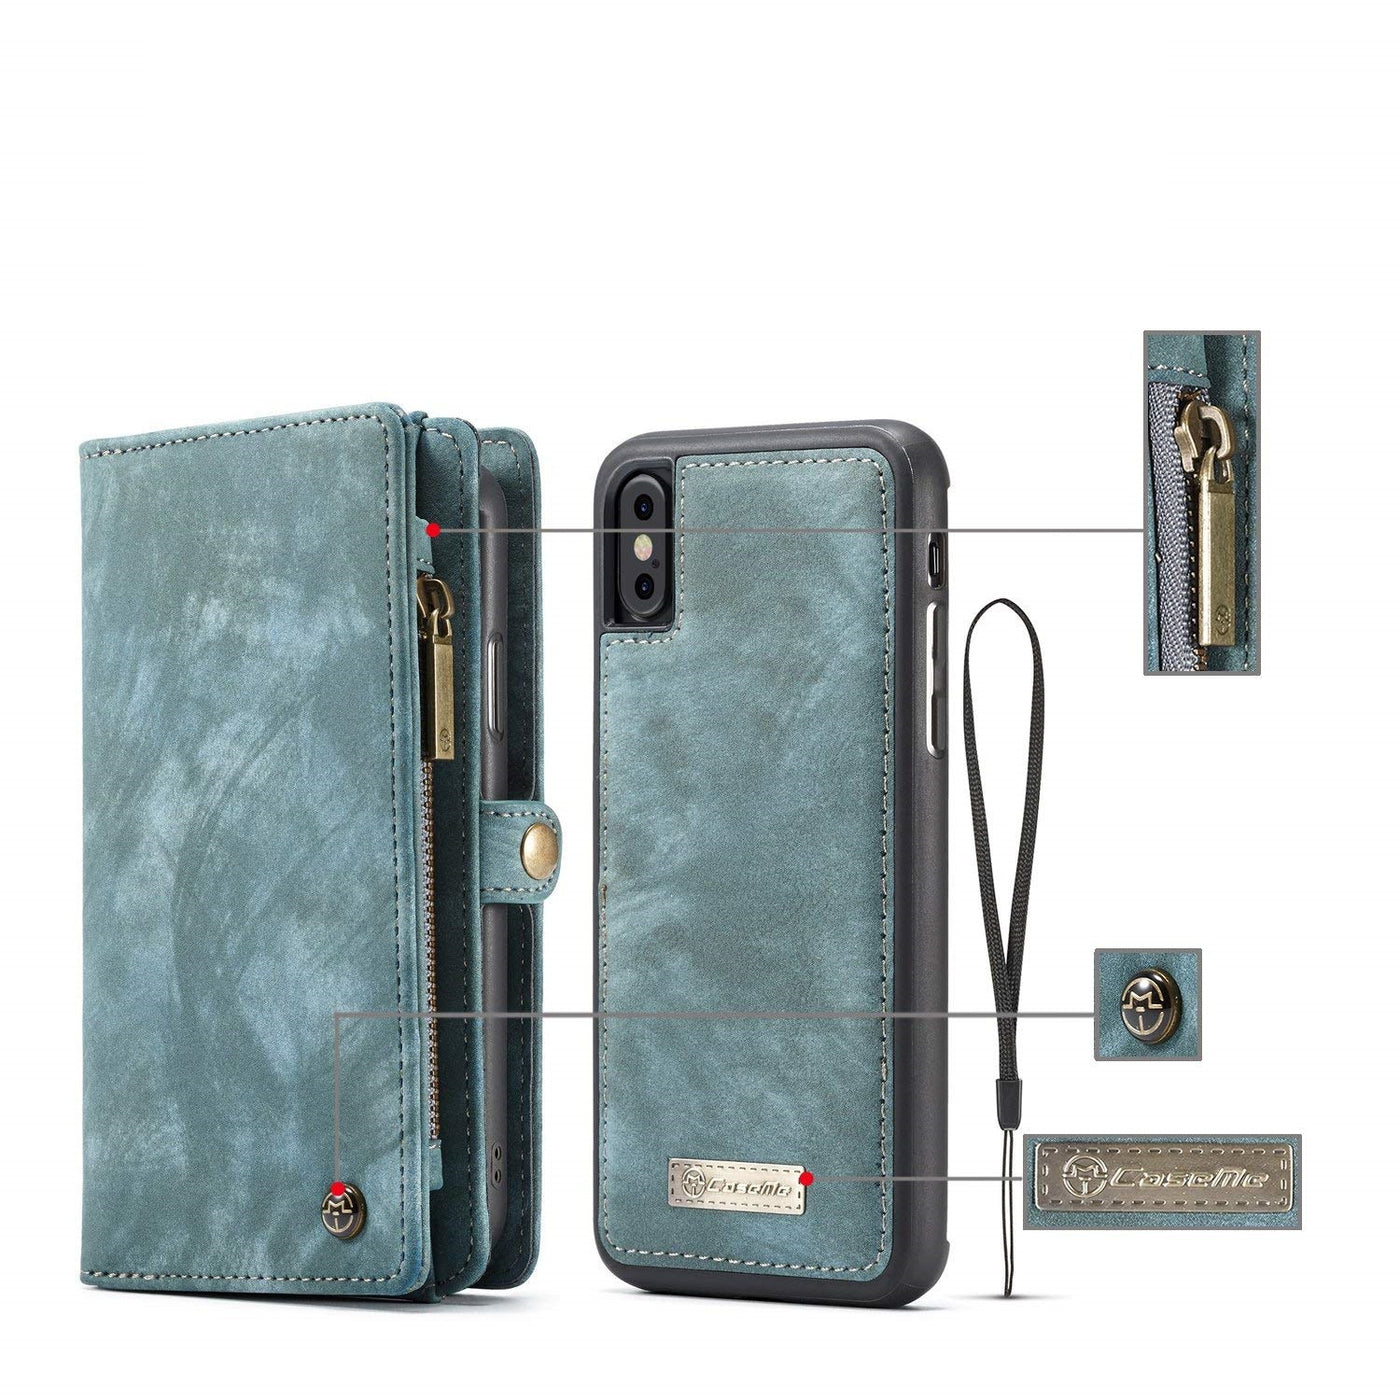 Excelsior Premium Multifunctional Leather Wallet flip cover case  For Apple iPhone XS Max